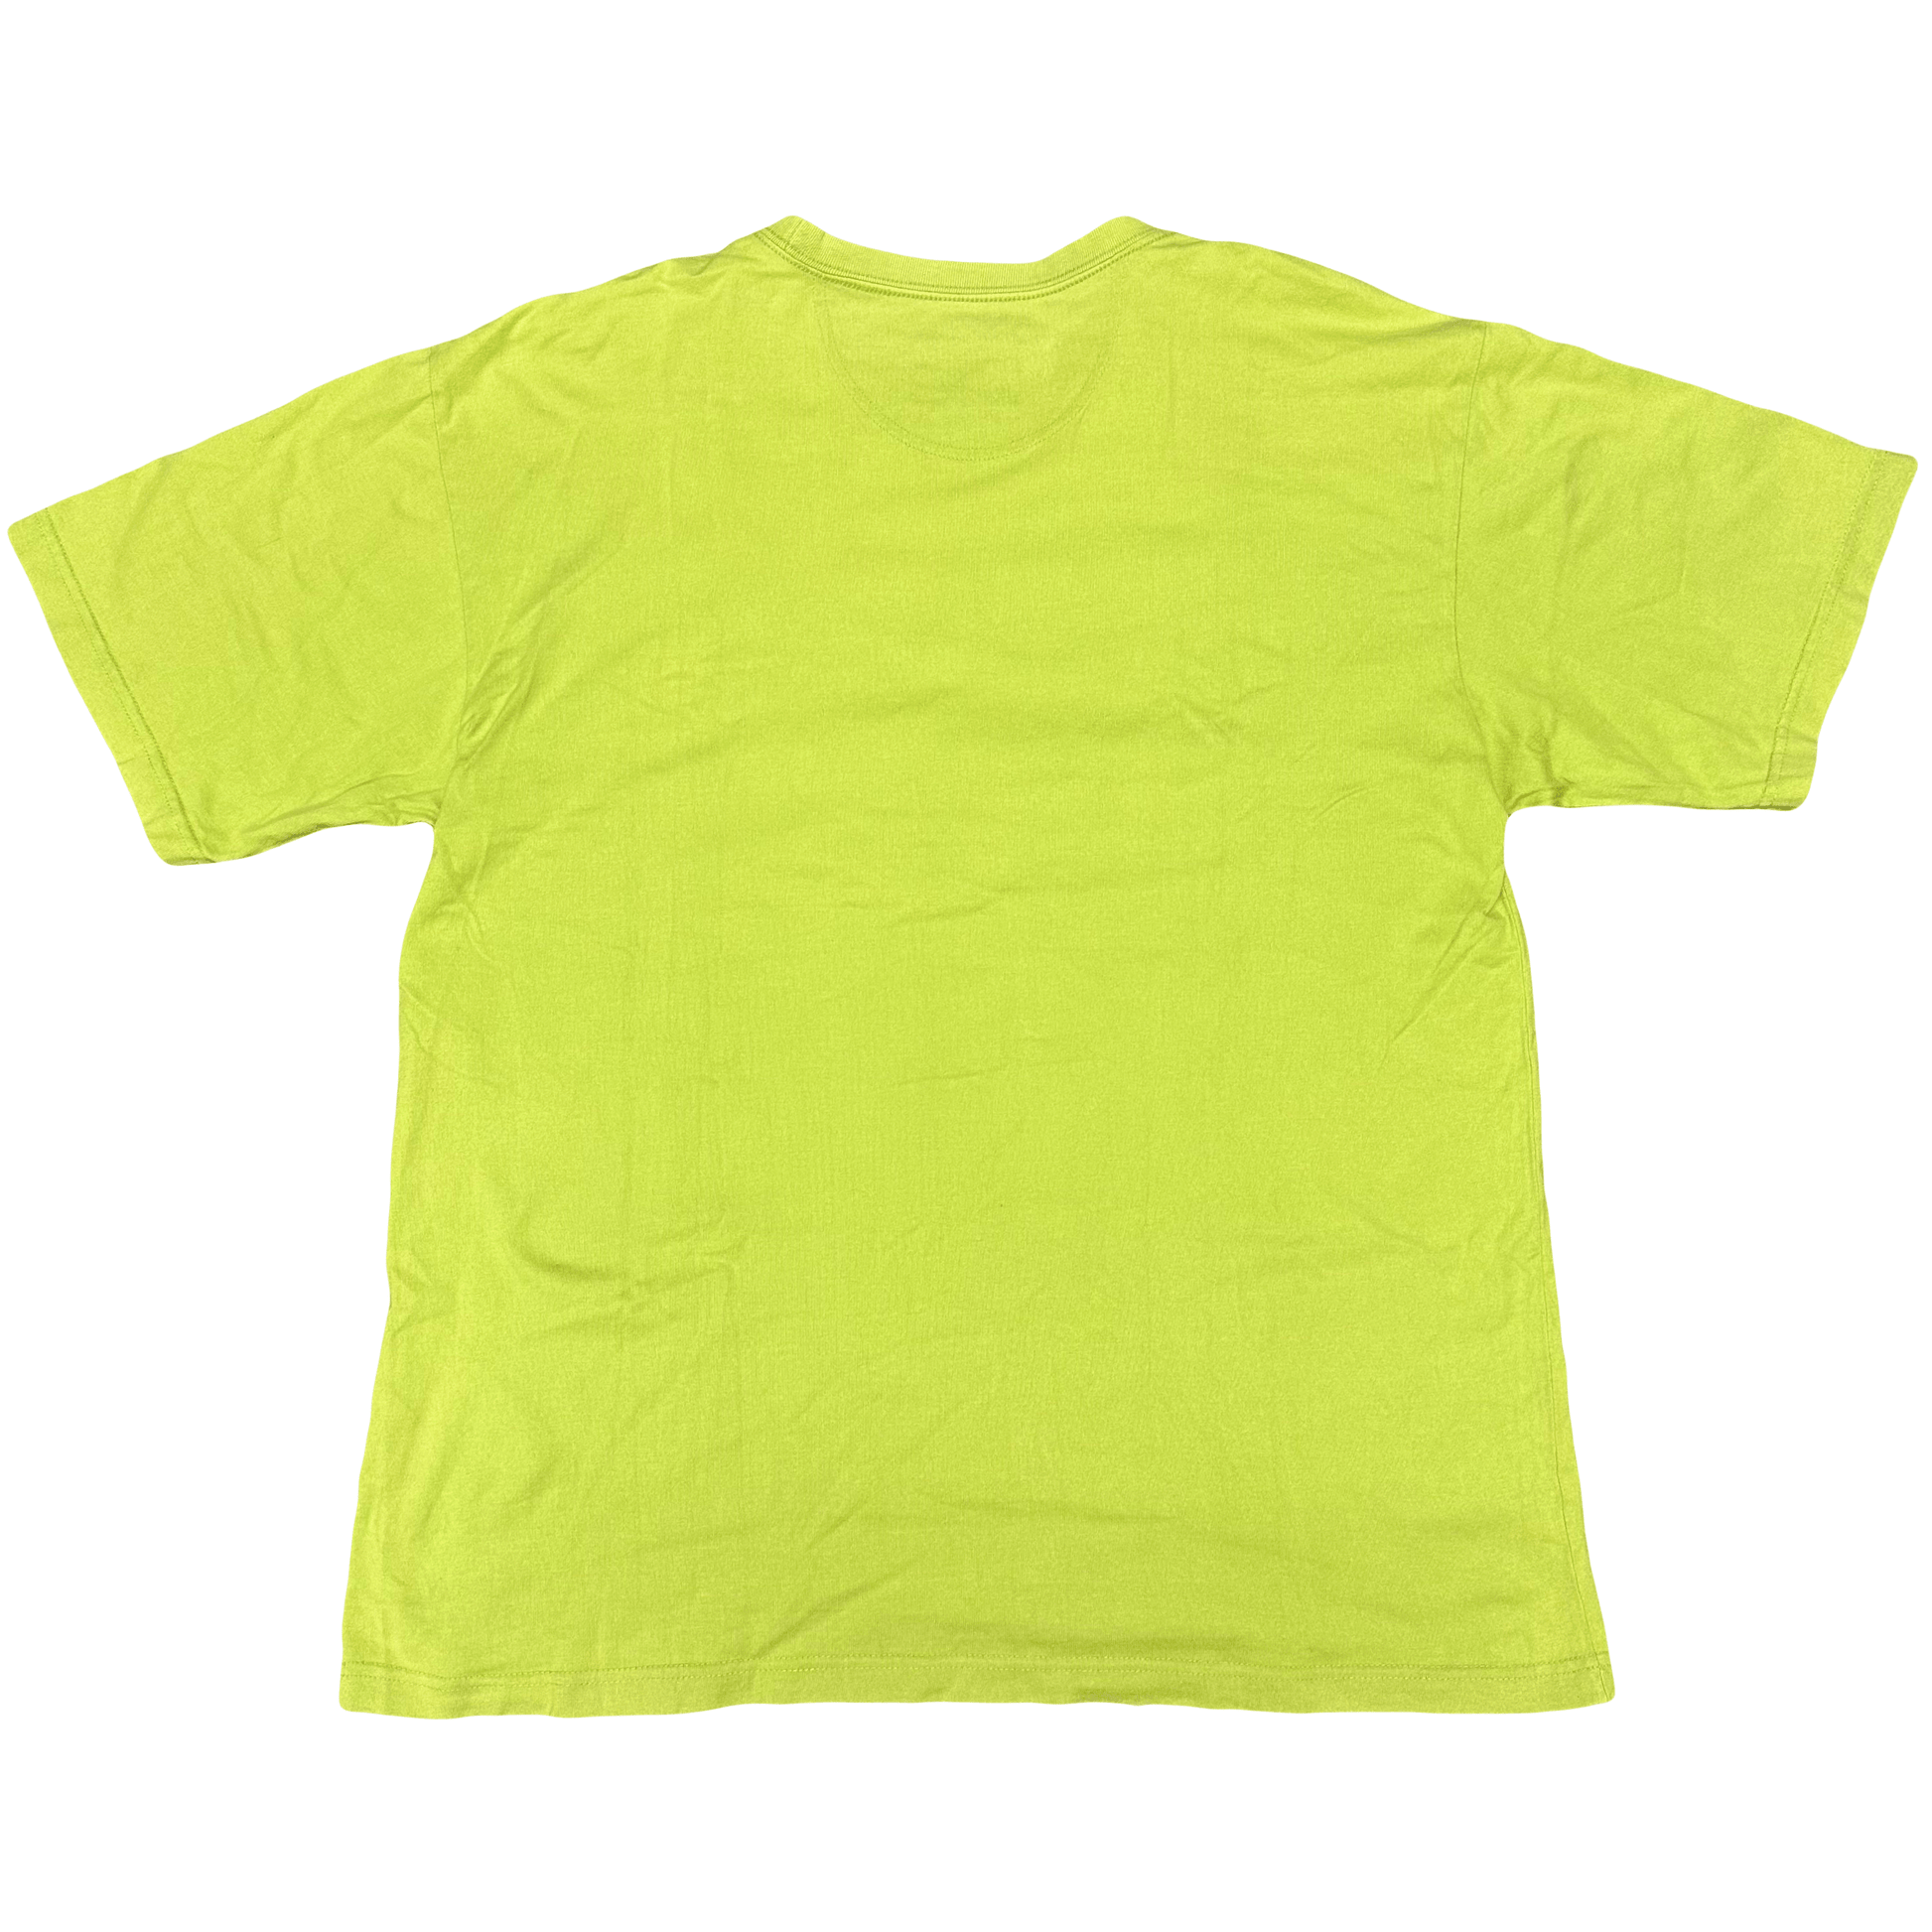 Avirex Spellout T-Shirt In Green ( L ) - Known Source